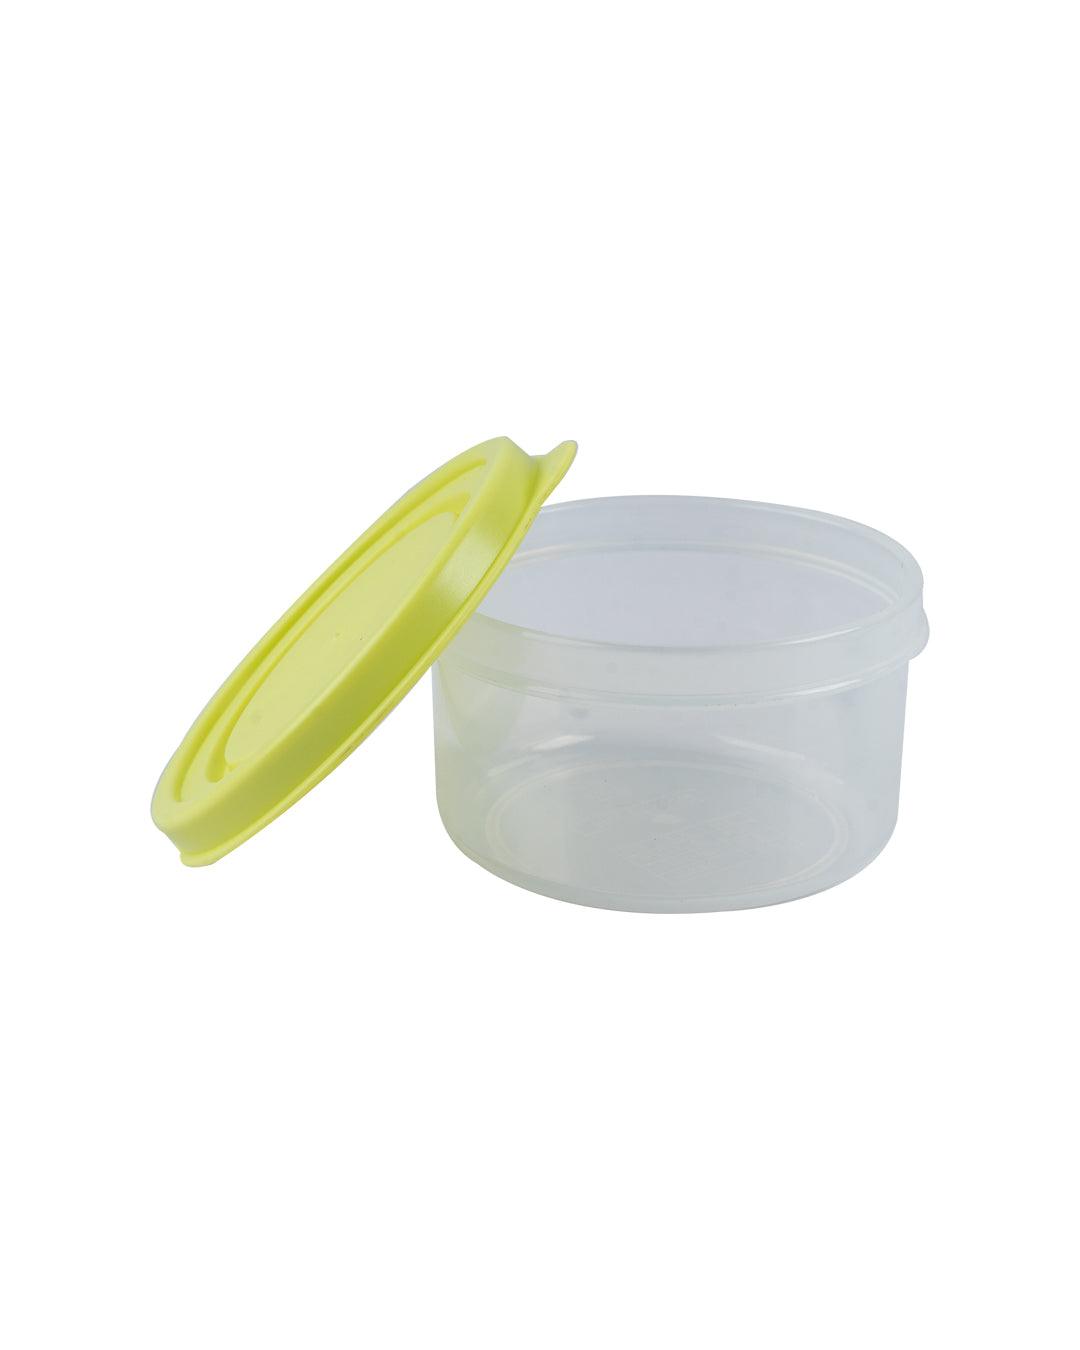 Food Storage Containers, Lime, Plastic, Set of 3, 160 mL - MARKET 99